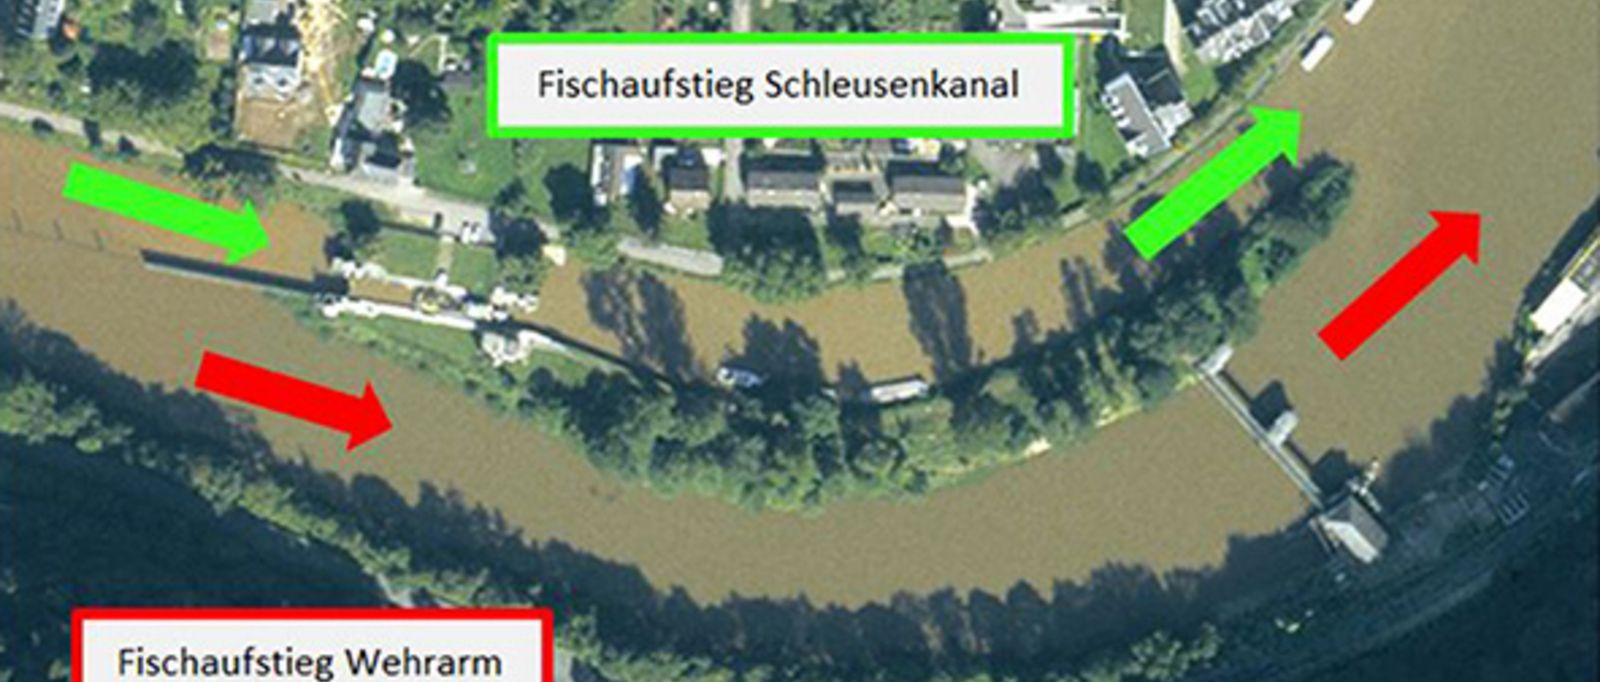 [Translate to English:] Fischschleusung